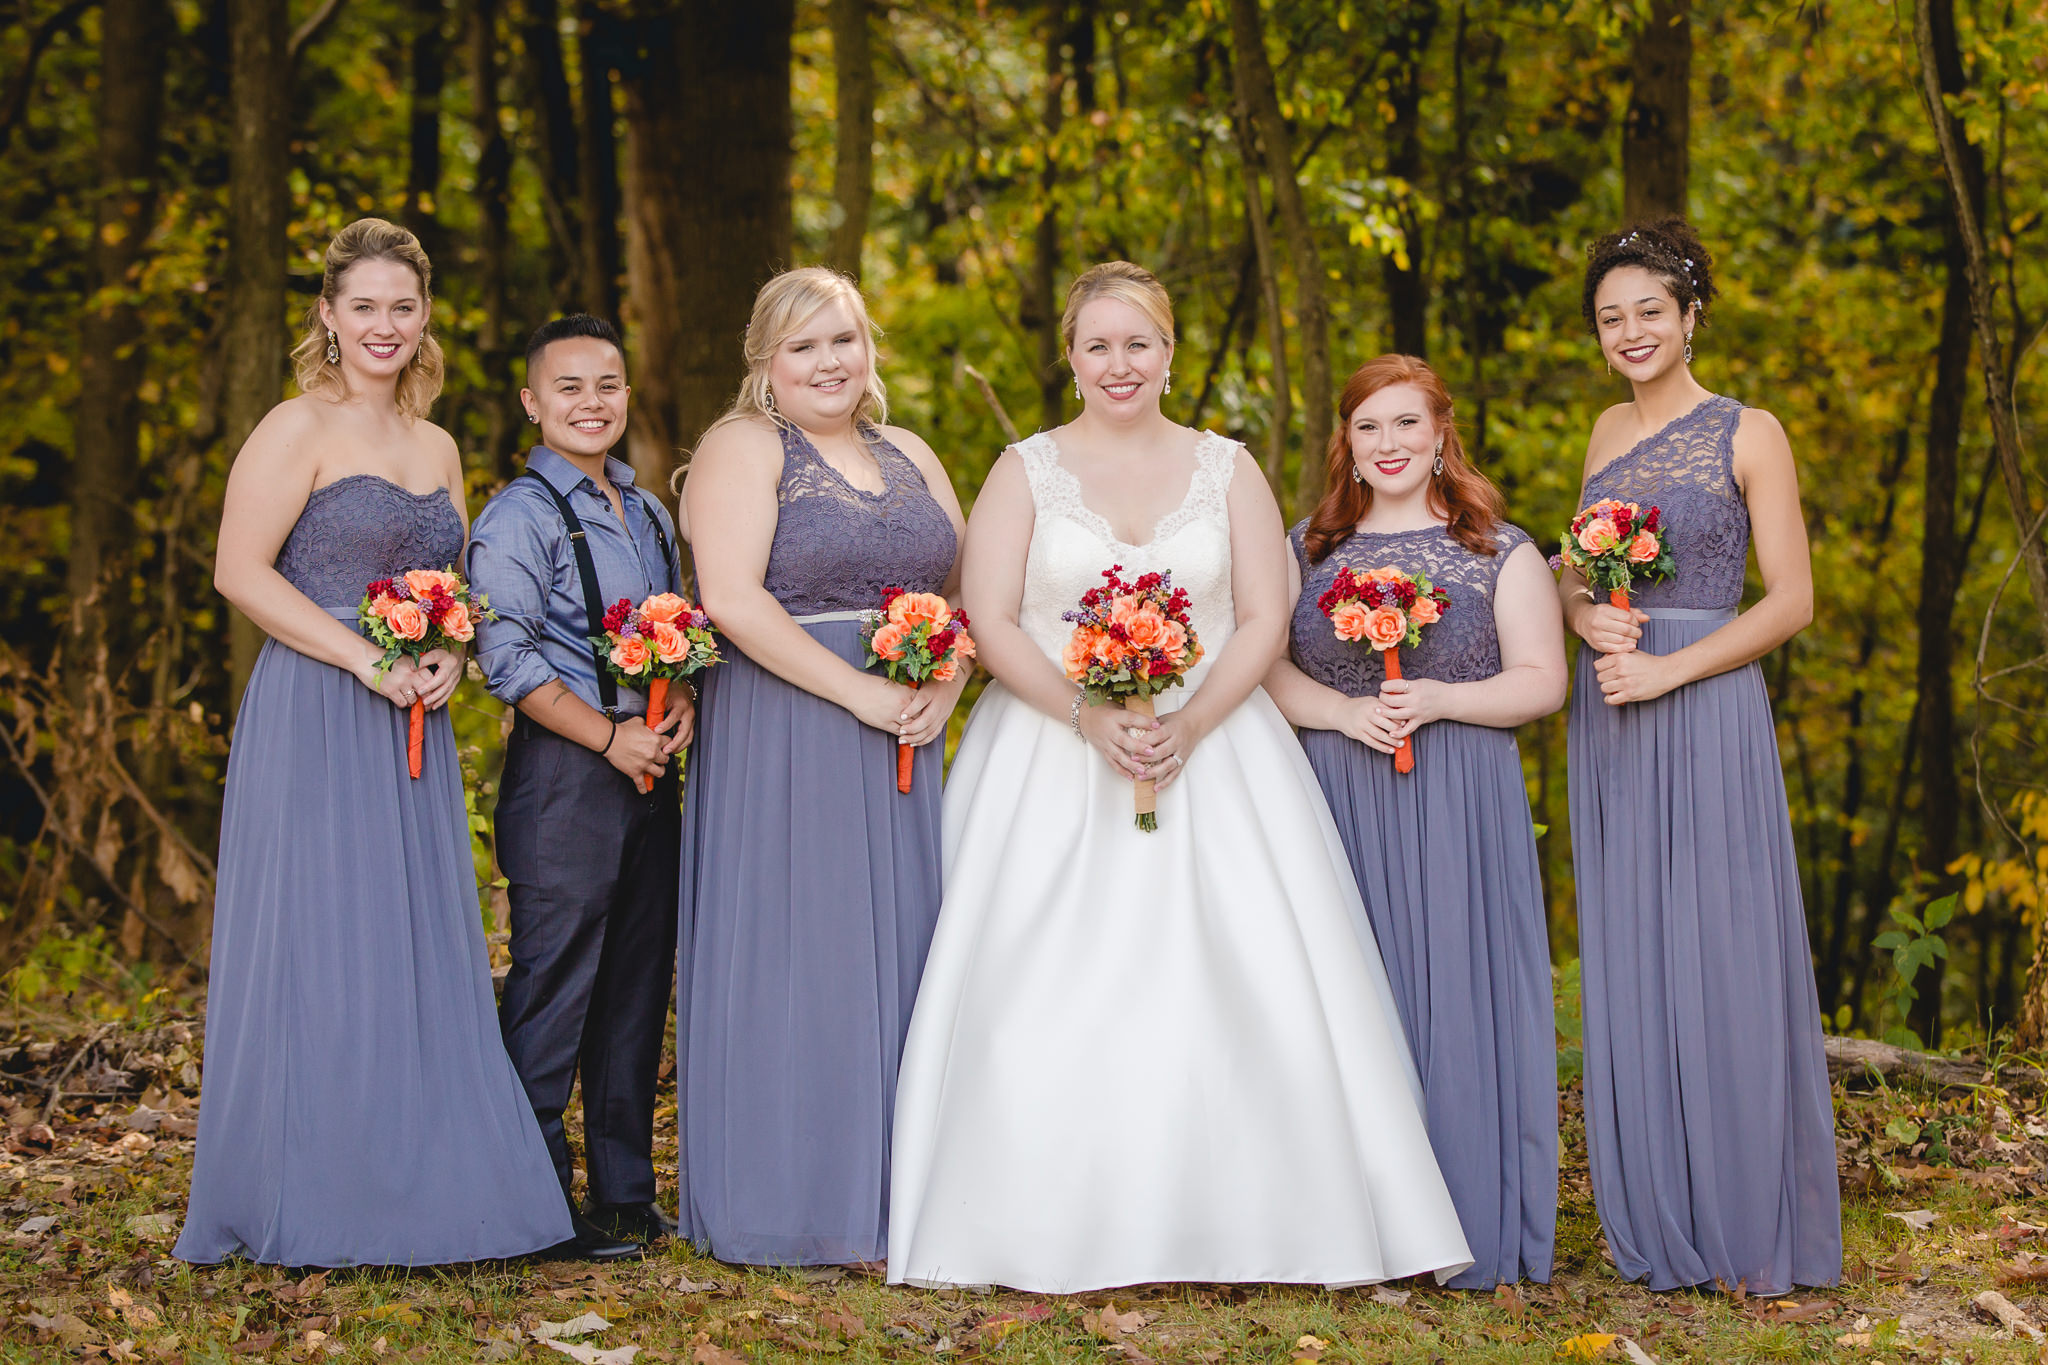 Bride and her bridesmaids at her October wedding at the Barn at Soergel Hollow